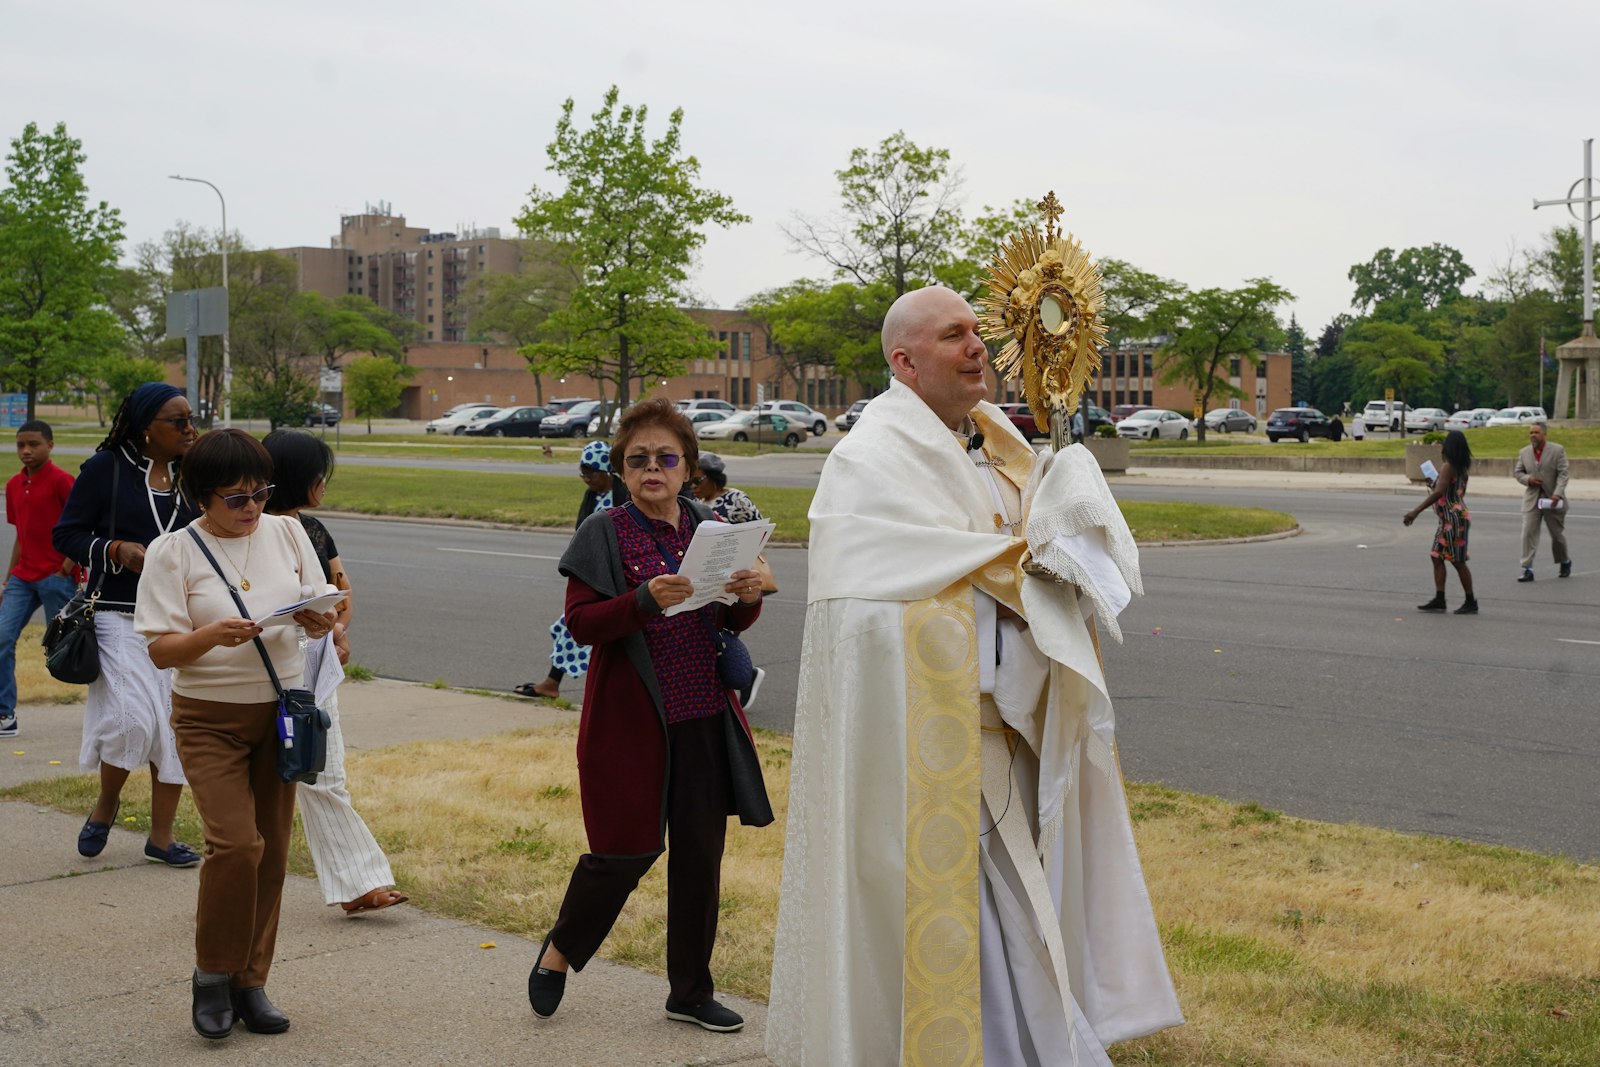 Fr. Jim Lowe, CC, of St. Scholastica Parish in northwest Detroit, carries the monstrance in procession through the Evergreen-Outer Drive neighborhood June 11. St. Scholastica and neighboring parishes hosted a 40 hours' devotion leading up to the feast of Corpus Christi, including praise and worship and Eucharistic adoration throughout the night leading up to the solemnity. (Daniel Meloy | Detroit Catholic)